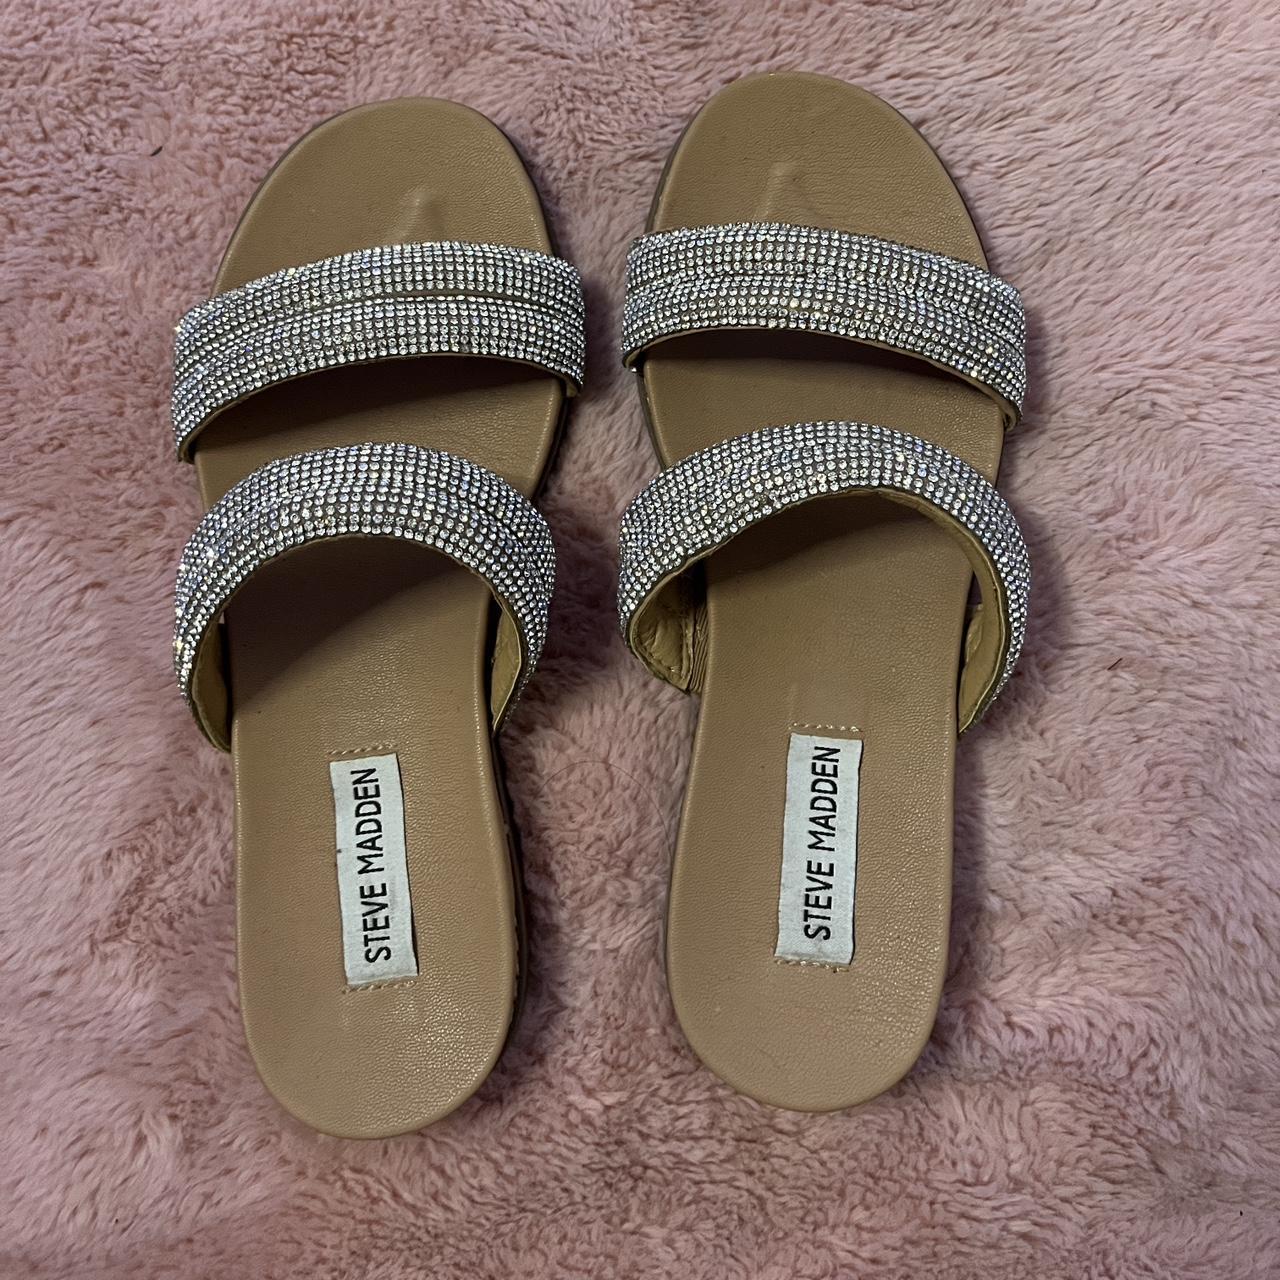 Steve Madden Sparkly Sandals Size 65 They Are A Depop